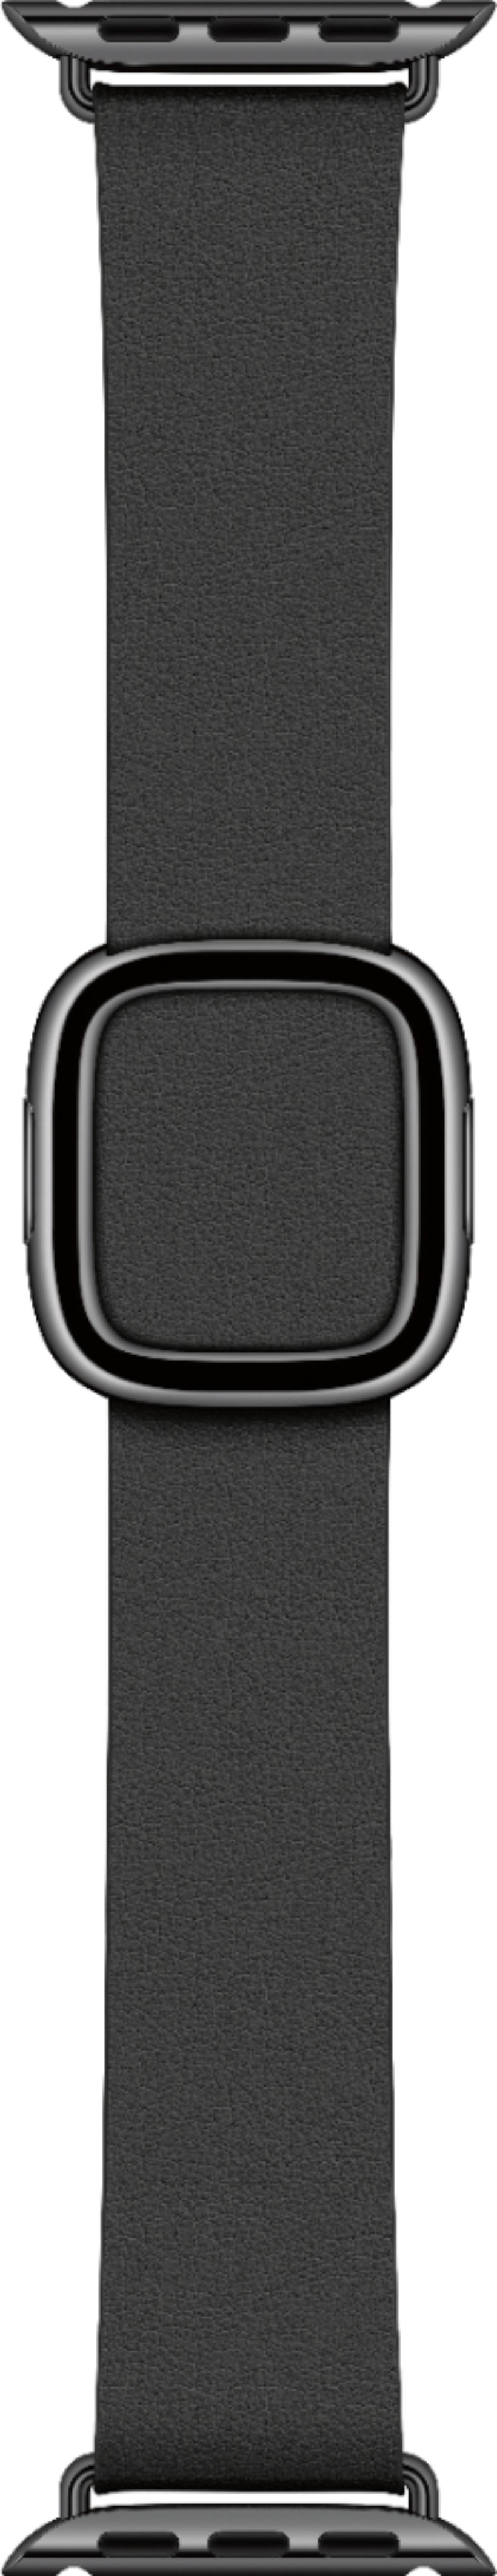 Modern Buckle for Apple Watch- 40mm Large - Black